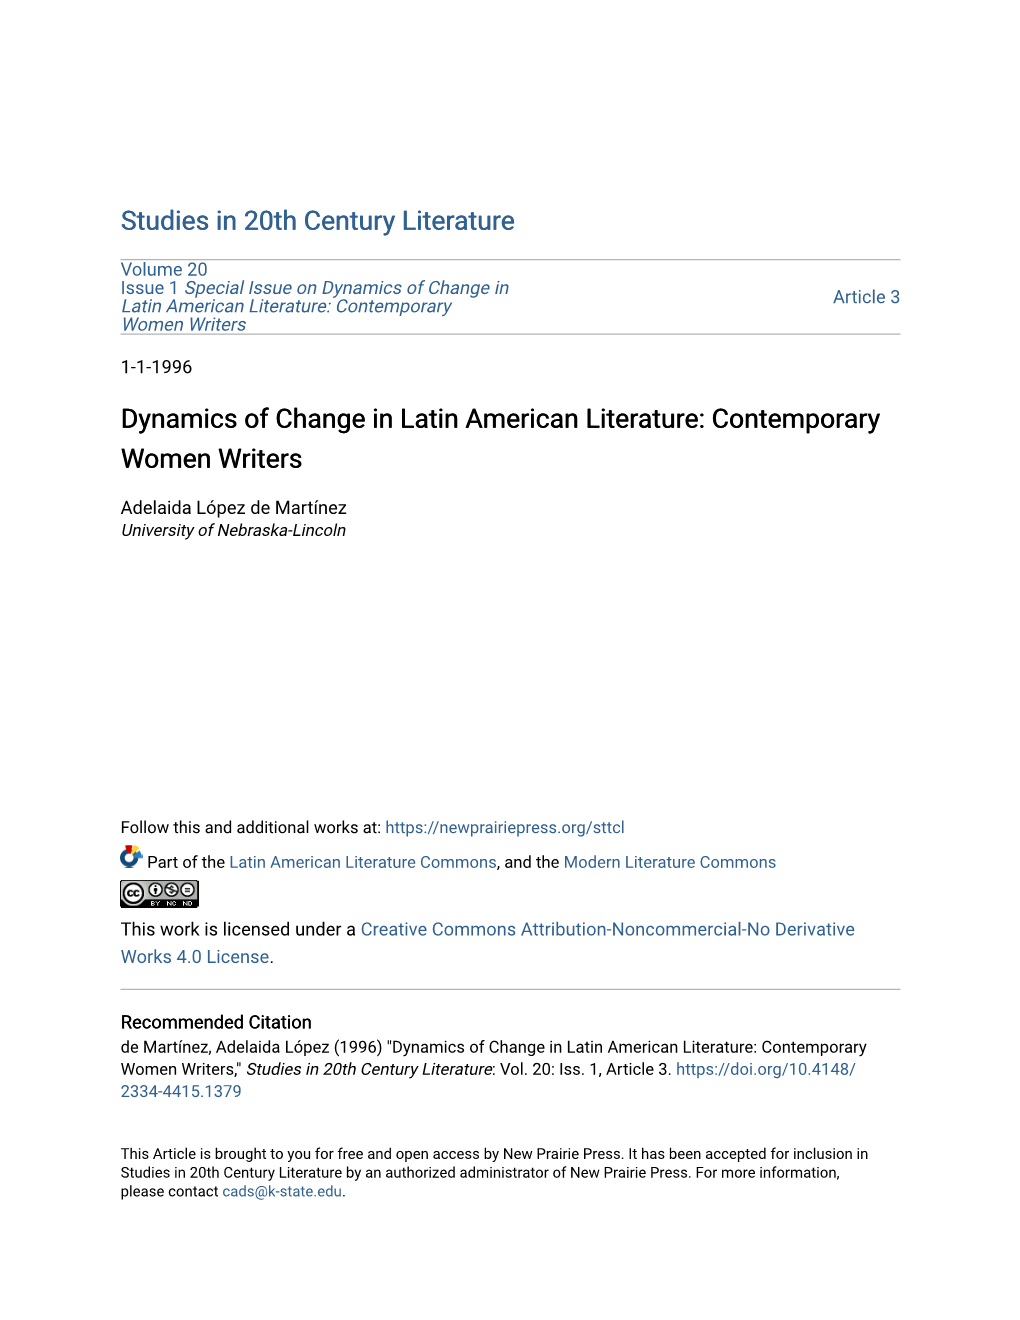 Dynamics of Change in Latin American Literature: Contemporary Article 3 Women Writers